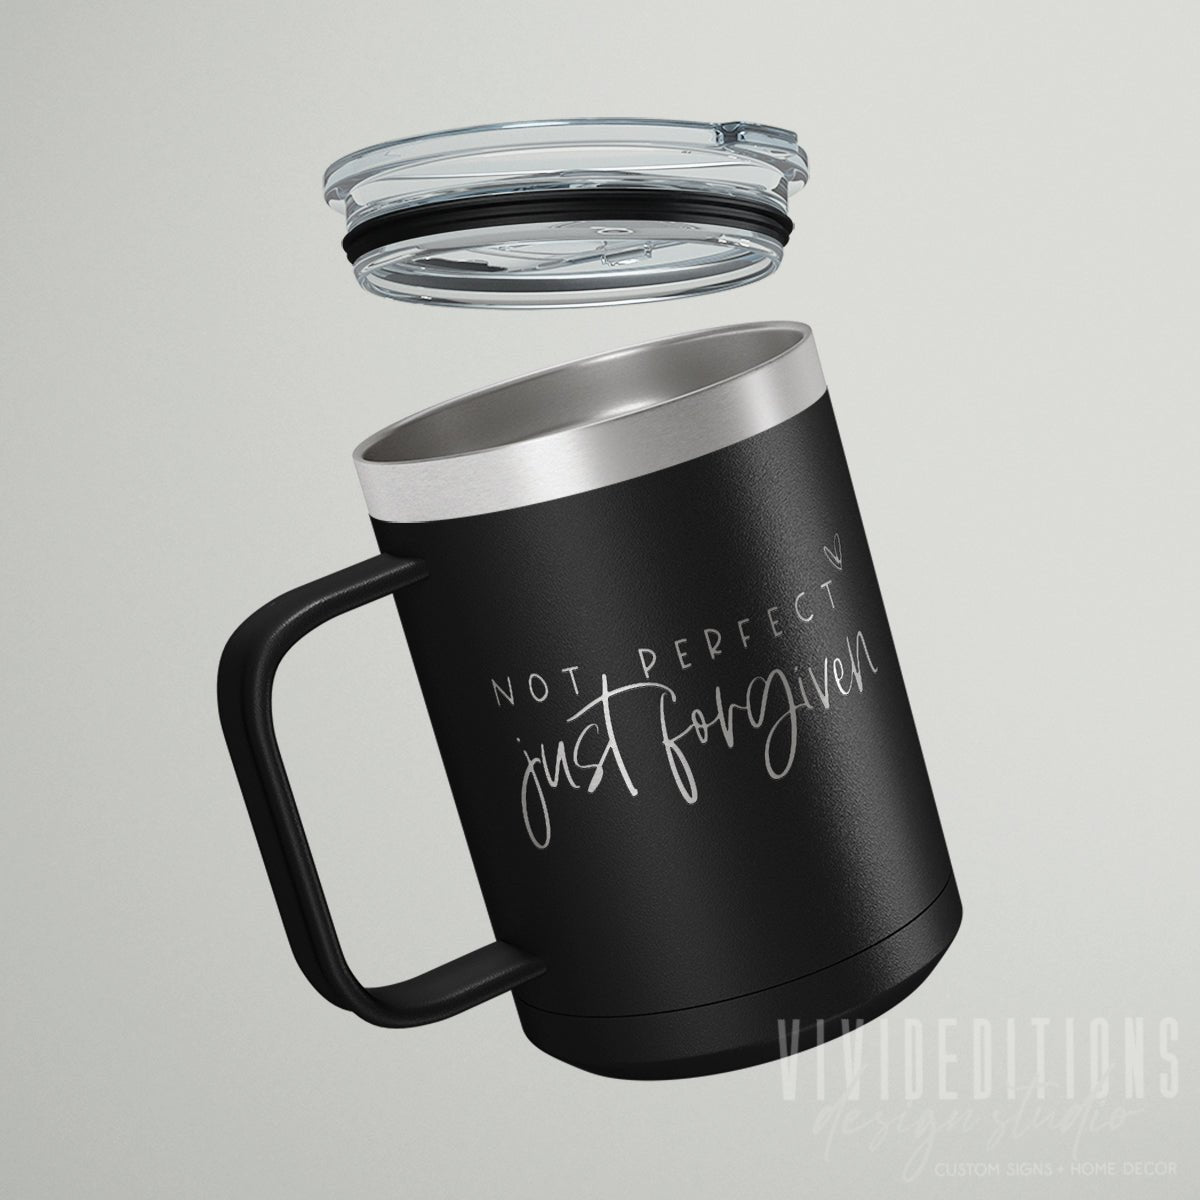 "Not Perfect Just Forgiven" Engraved Travel Coffee Mug with Slider Lid - 15oz (16 color options) Tumblers - VividEditions